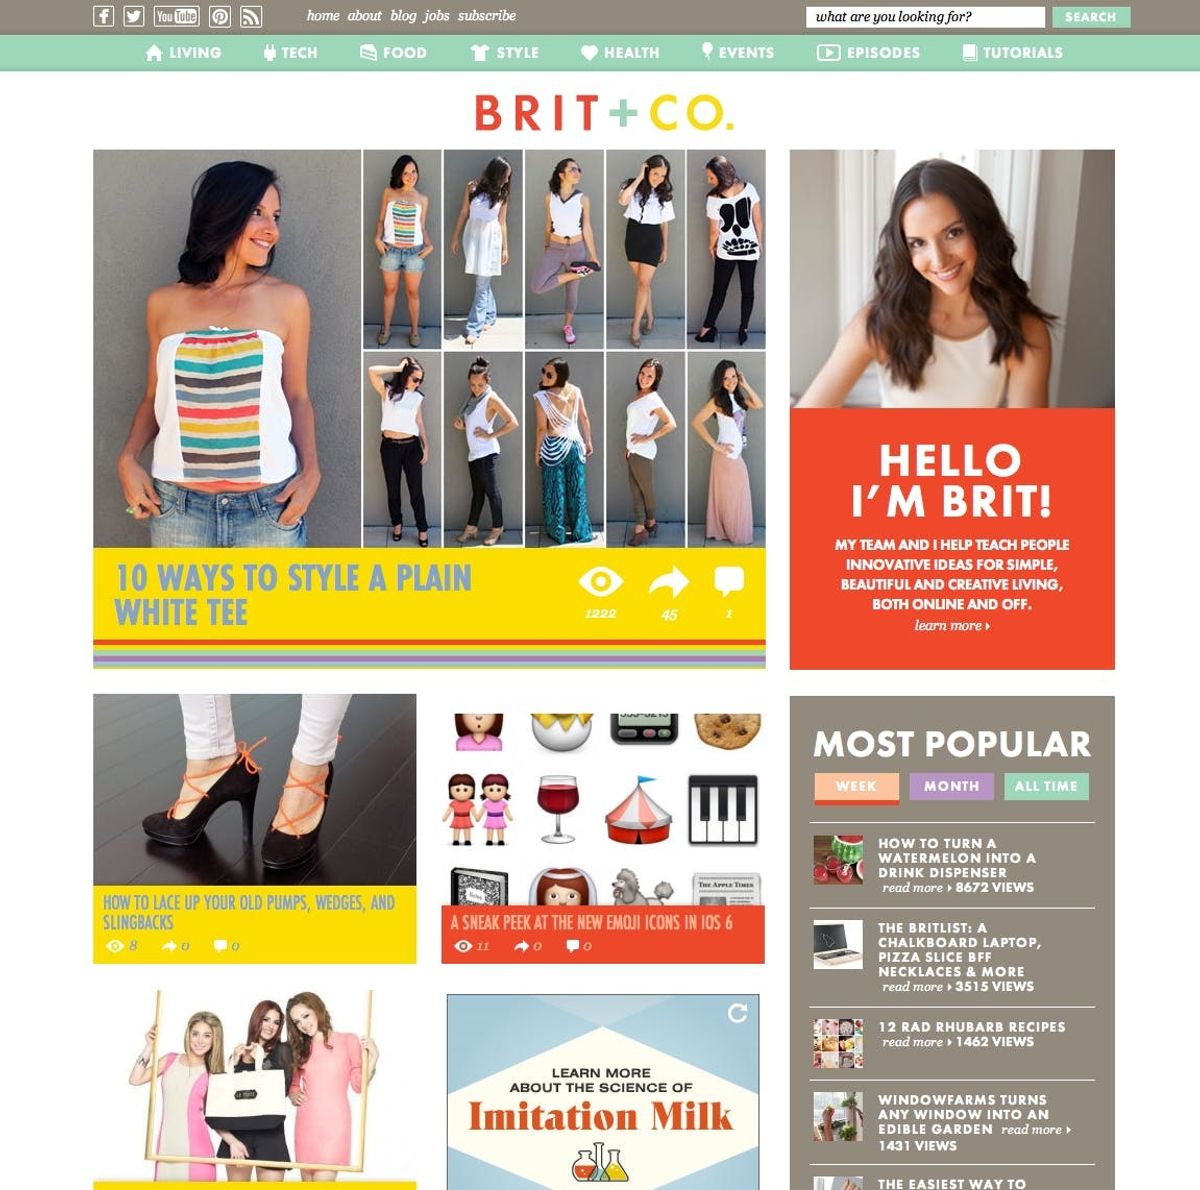 Introducing the New Brit + Co. Design